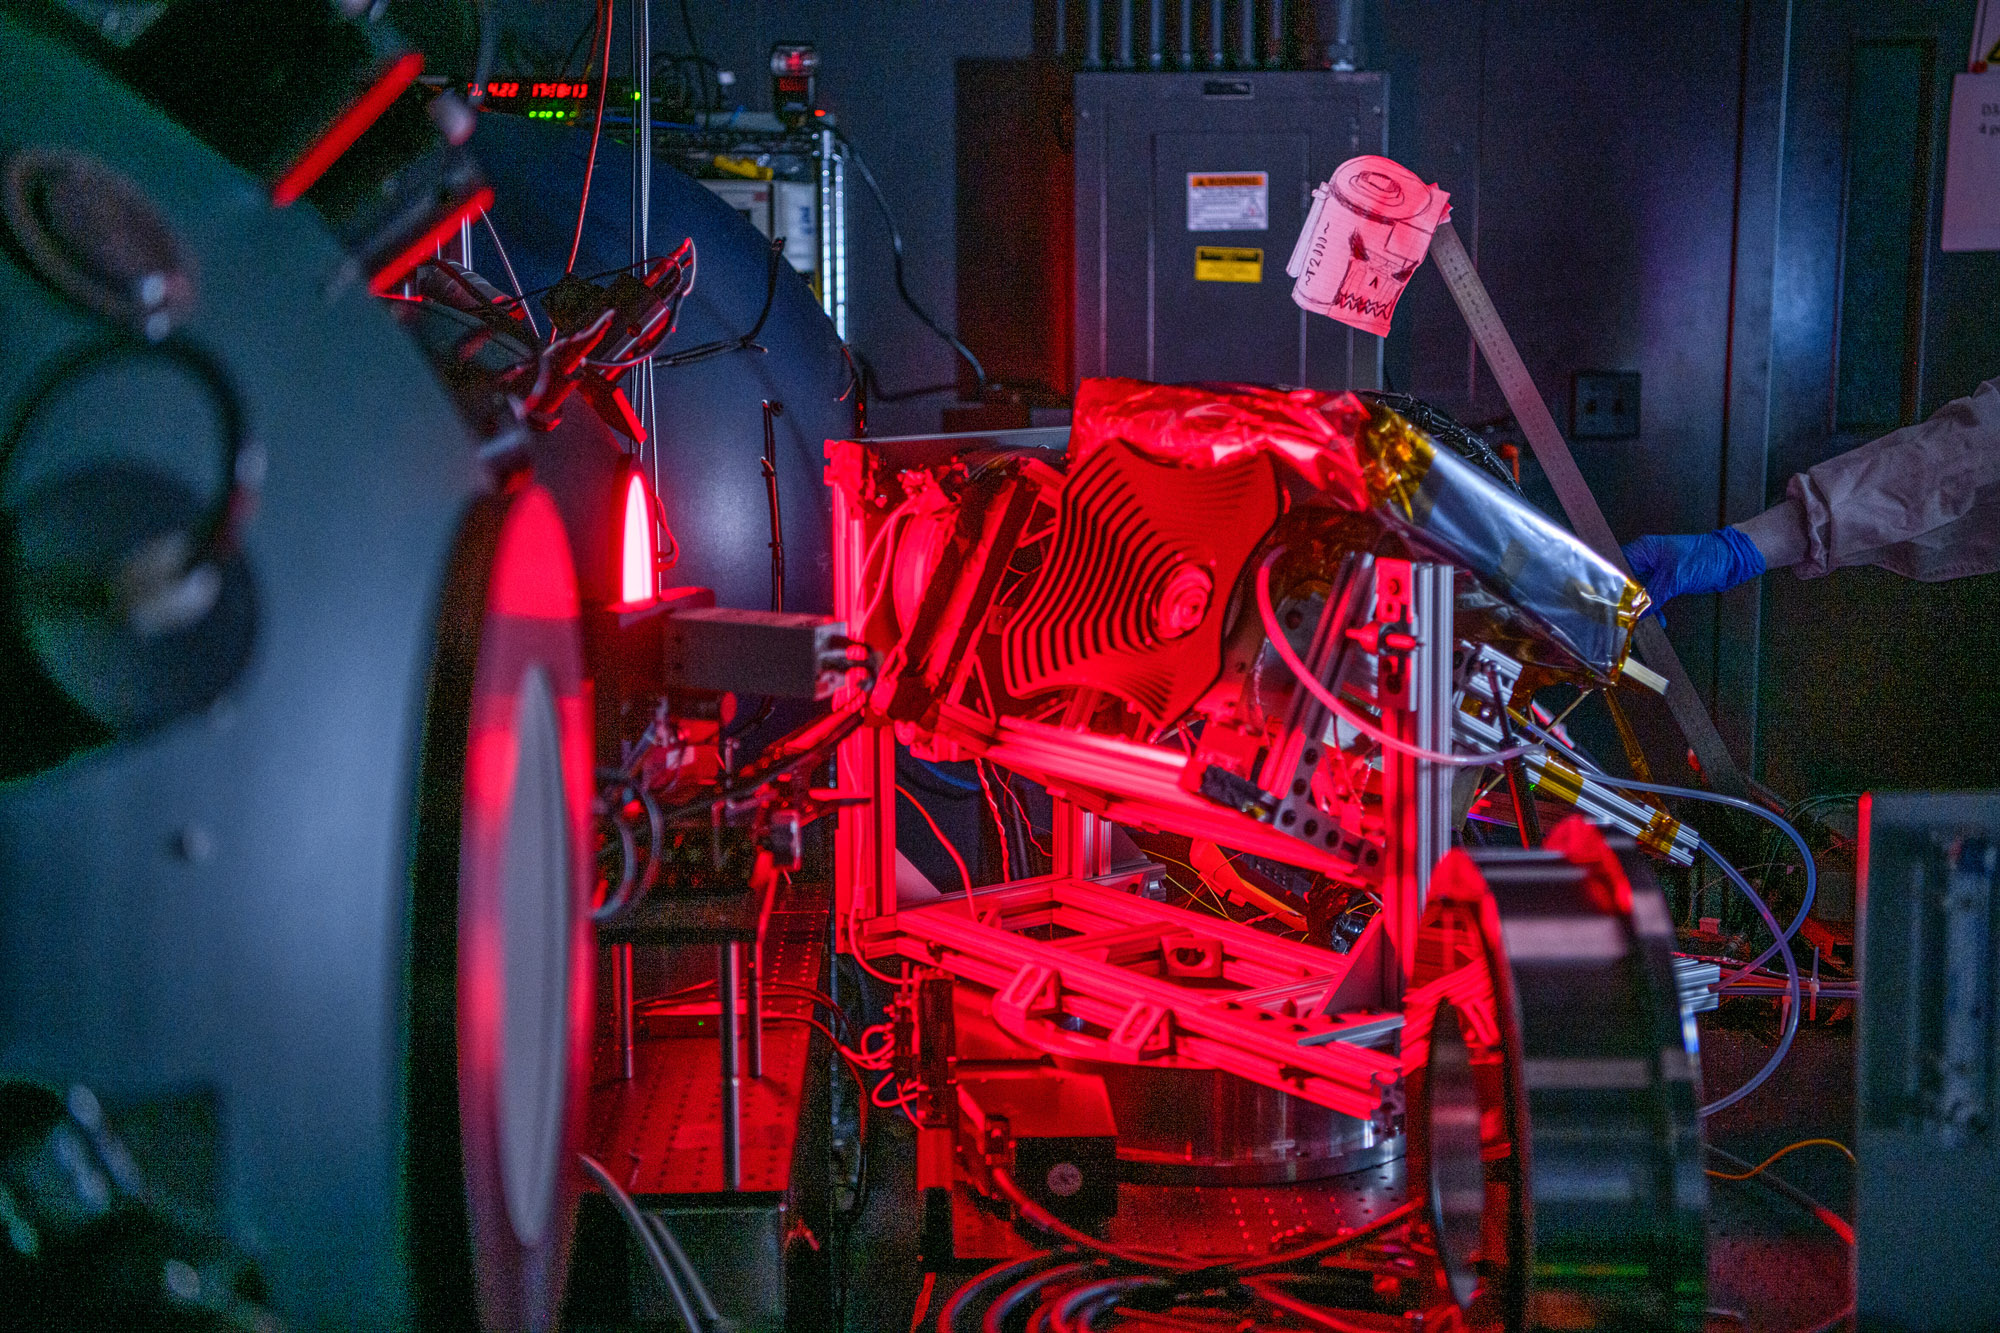 A small piece of spaceflight hardware in a dark room, exposed to a bright red light for calibration testing prior to launch